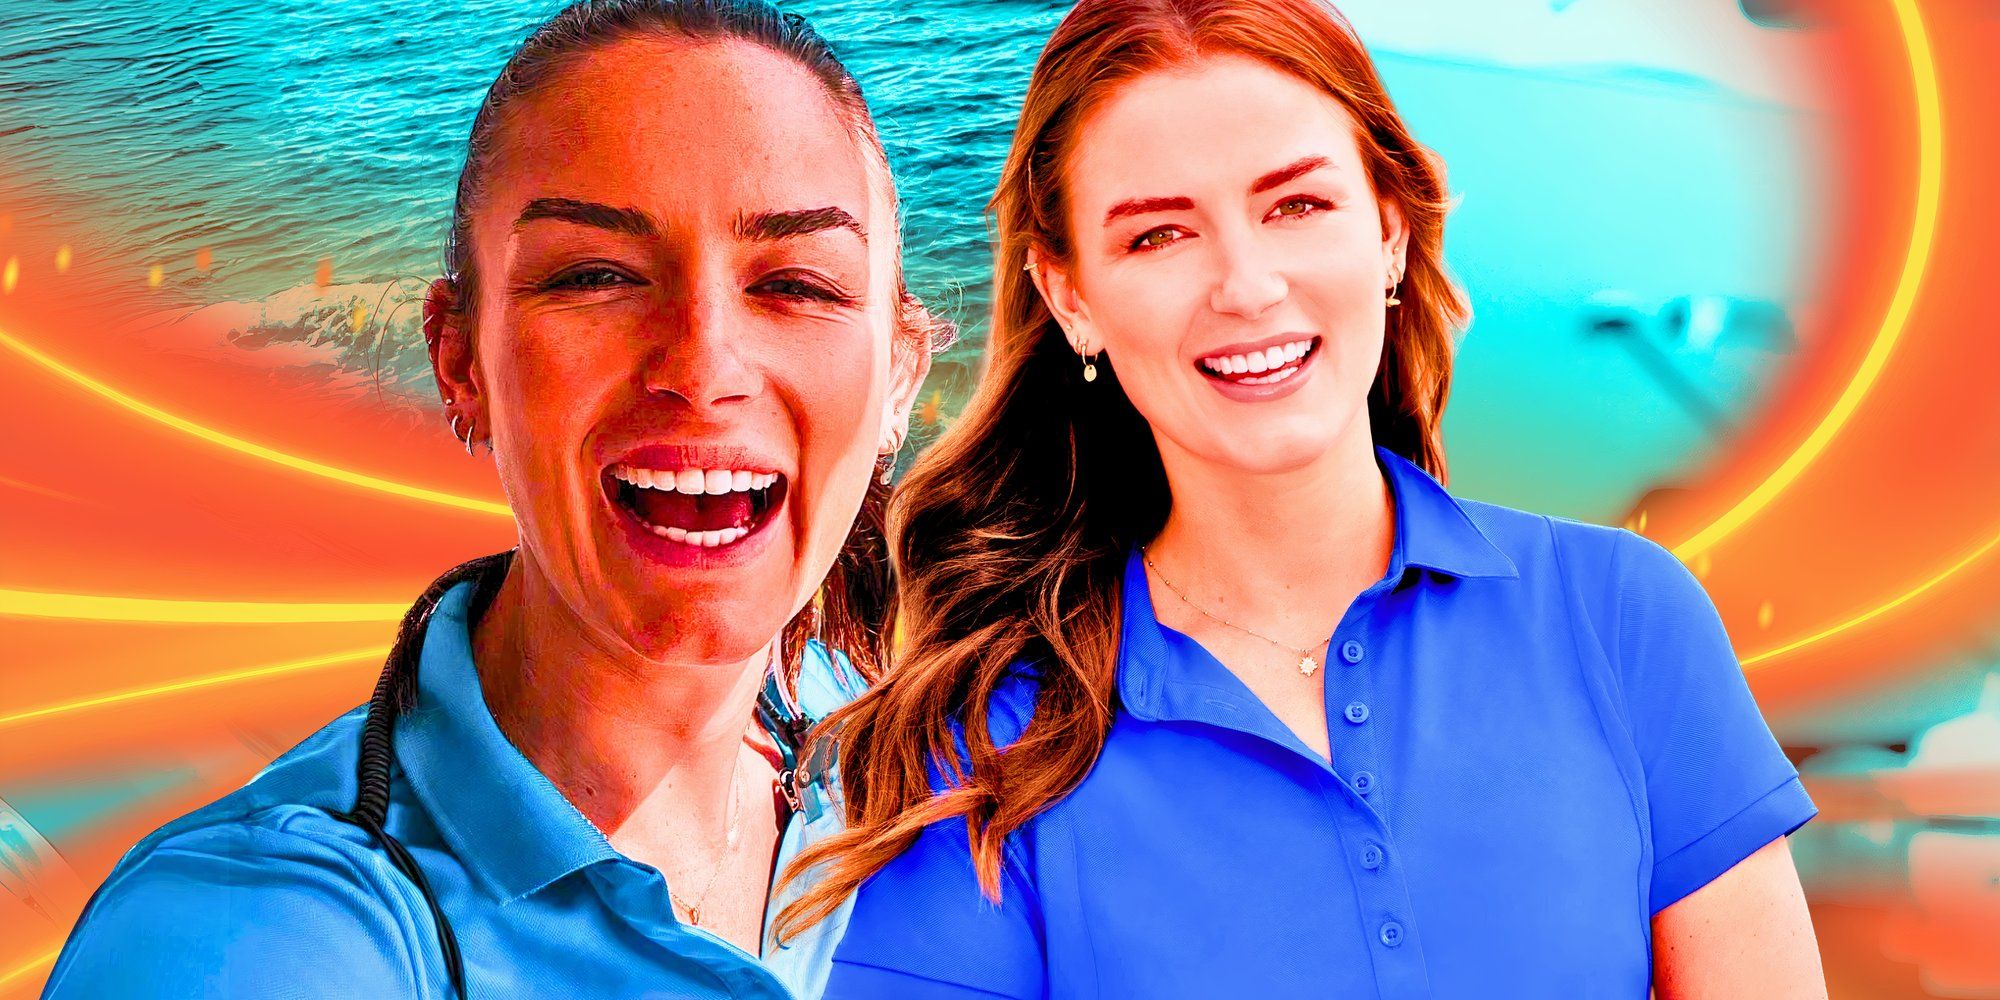 montage of Aesha scott on below deck down under wearing a blue uniform and smiling brightly